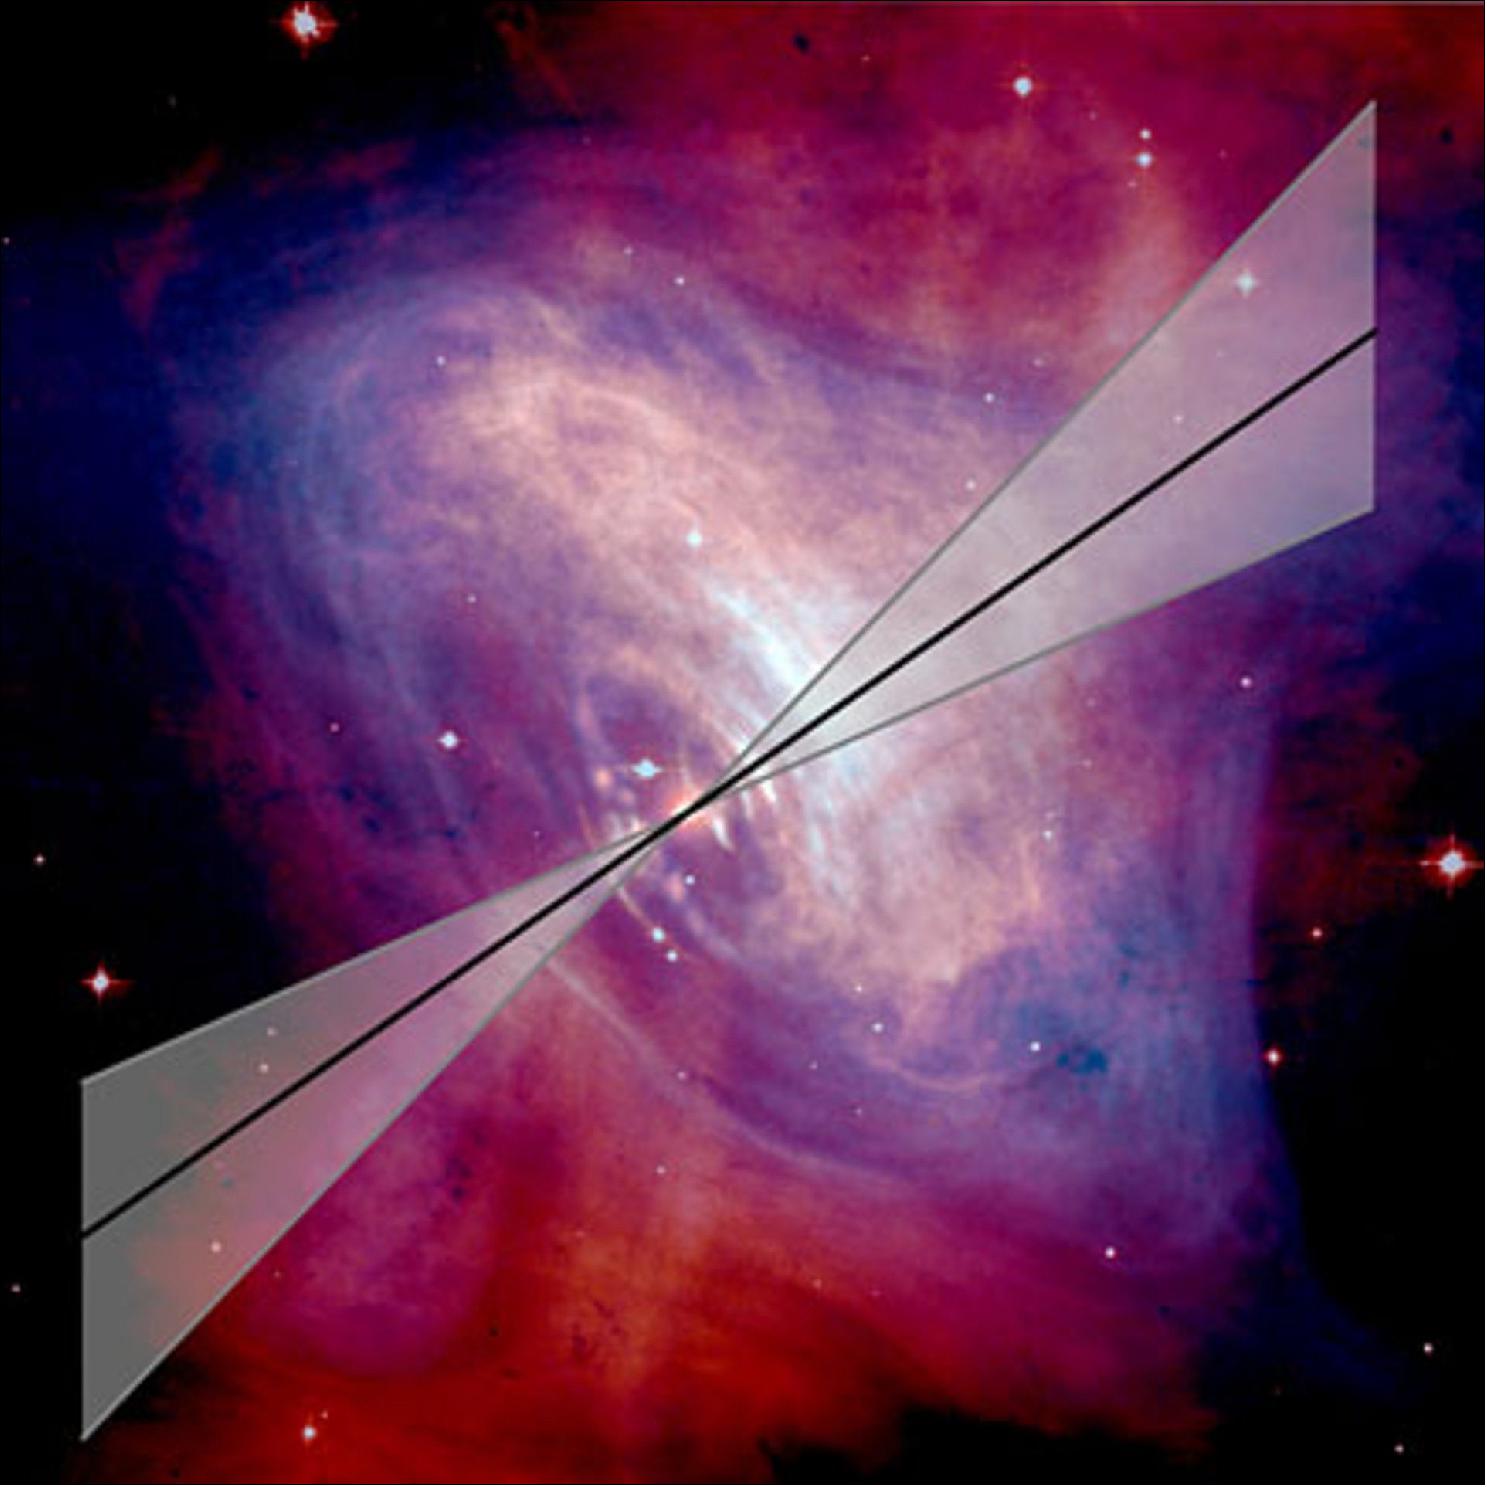 Figure 38: High-energy polarized emission from Crab Nebula. This image shows the direction of polarization (alignment) of the high-energy radiation emitted by the Crab Nebula, as detected by ESA’s INTEGRAL gamma-ray observatory. The shaded part represents the error in the determination of this direction. This direction is remarkably aligned with the inner jets of the Crab. On their turn, these are aligned with the rotation axis of the pulsar located at the center of the system.- The Crab Nebula image in the background was obtained by combining an optical image by NASA/ESA’s Hubble Space Telescope and an X-ray image by NASA’s Chandra X-ray observatory [image credit: NASA/CXC/ASU/J. Hester et al.(for the Chandra image); NASA/HST/ASU/J. Hester et al. (for the Hubble image)]